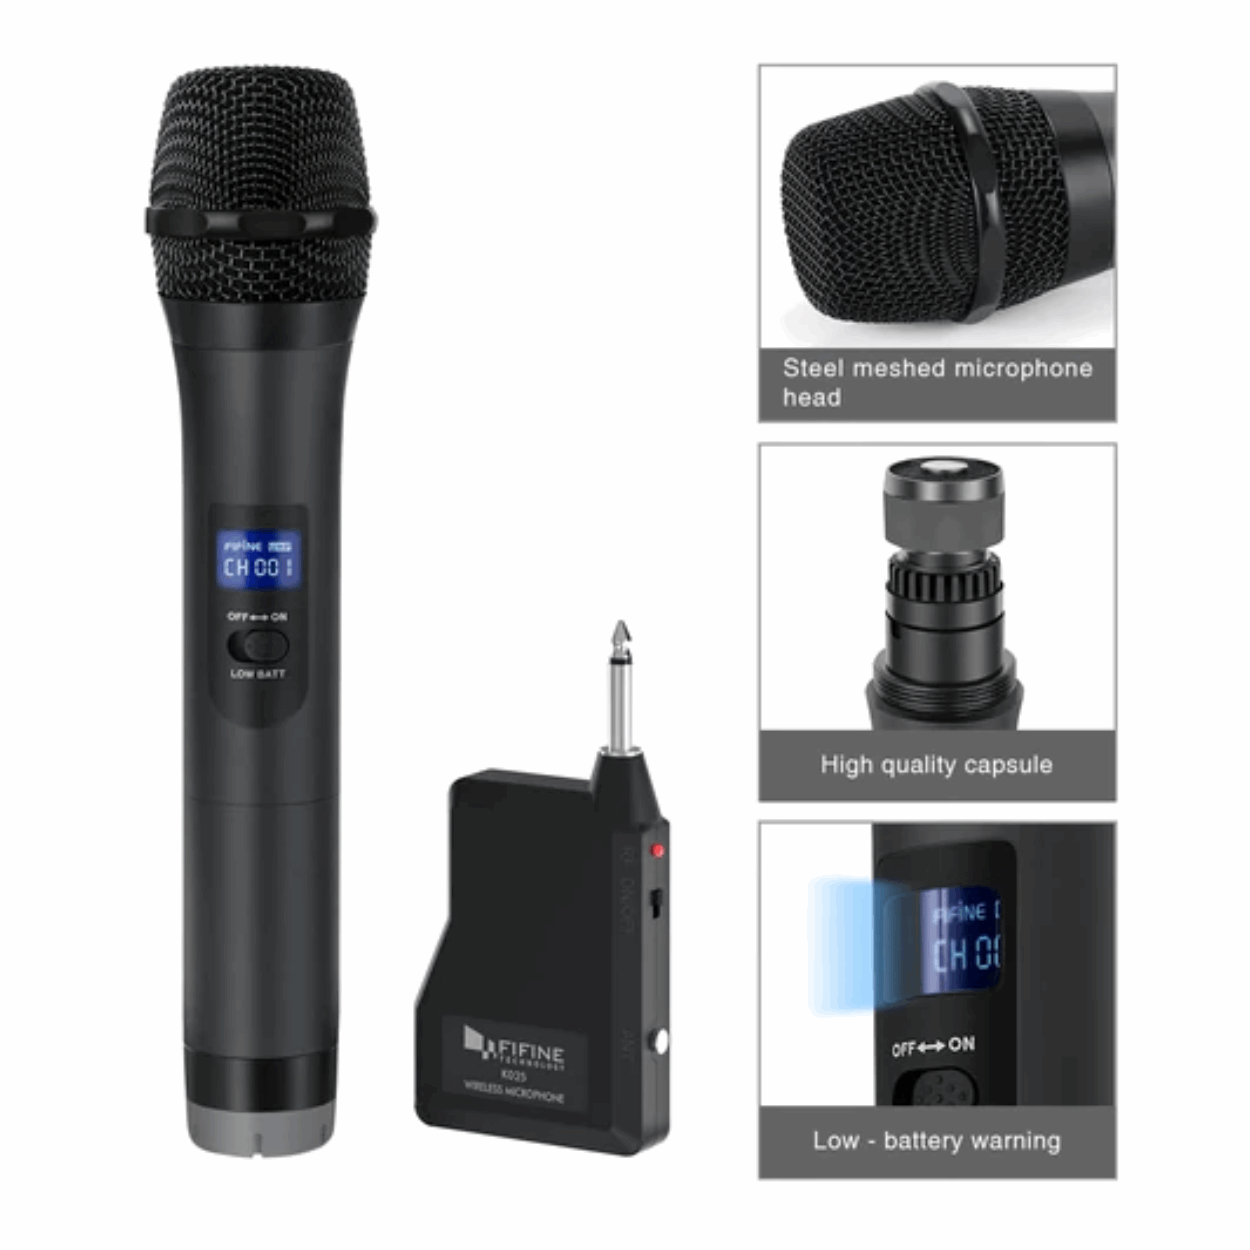 FIFINE K025 Wireless Microphone, Vocal Microphone, Fifine Handheld Dynamic Microphone Wireless mic System for Karaoke Nights and House Parties to Have Fun Over The Mixer,PA System,Speakers (K-025)